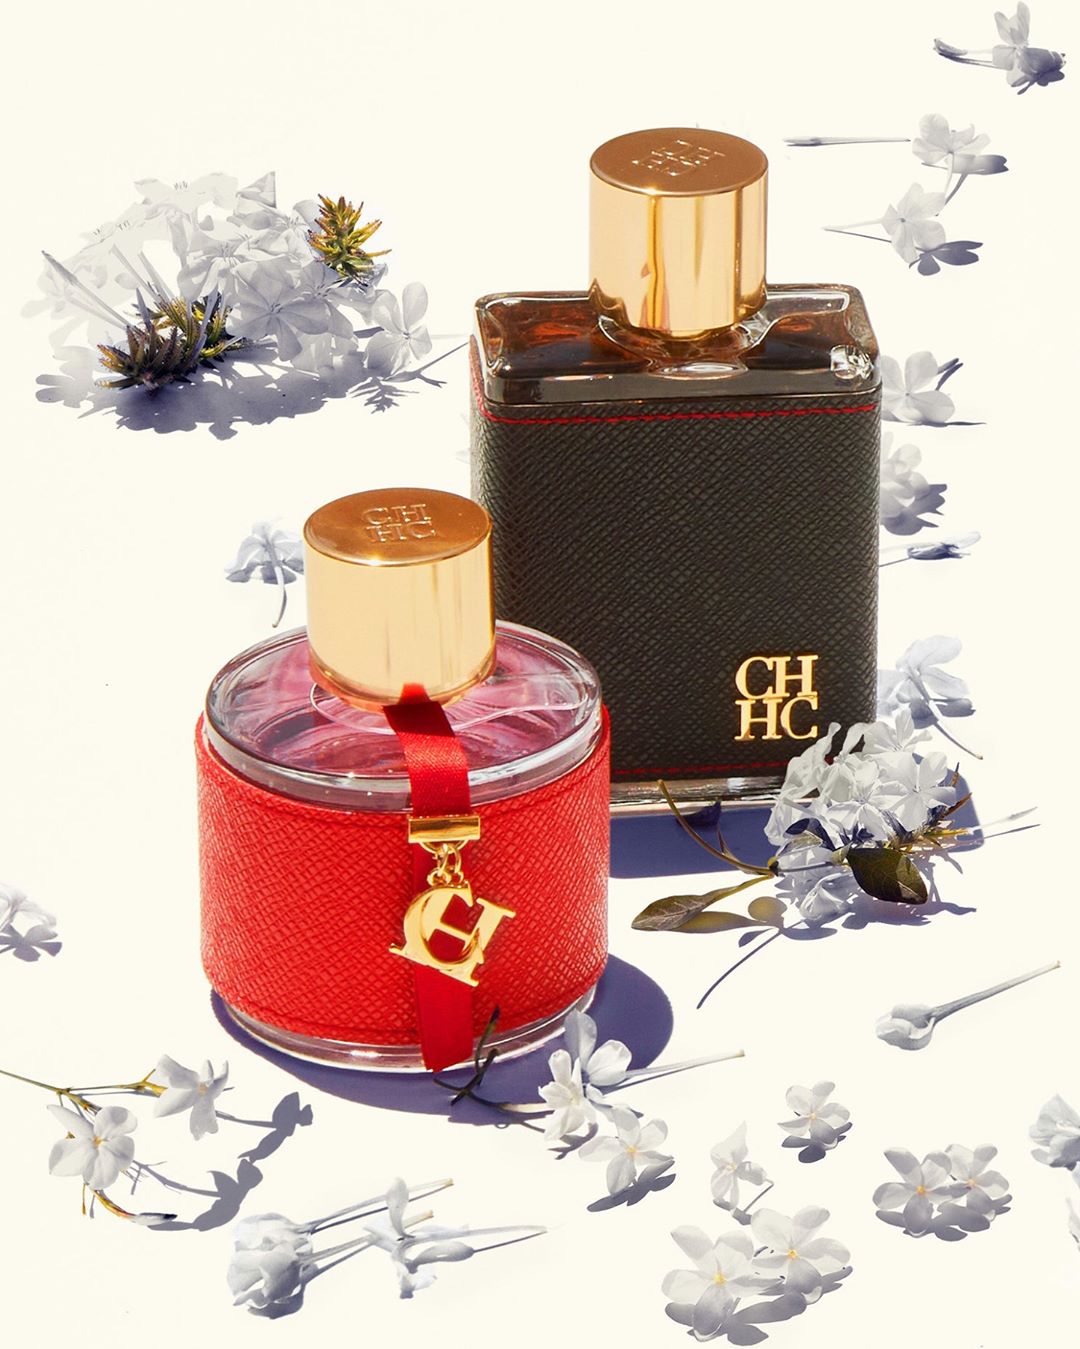 CAROLINA HERRERA - Rich, warm and sensual, the fragrant jasmine flower is at the heart of many Carolina Herrera fragrances. Extremely versatile,  you'll find it in fragrances for him and for her, like...